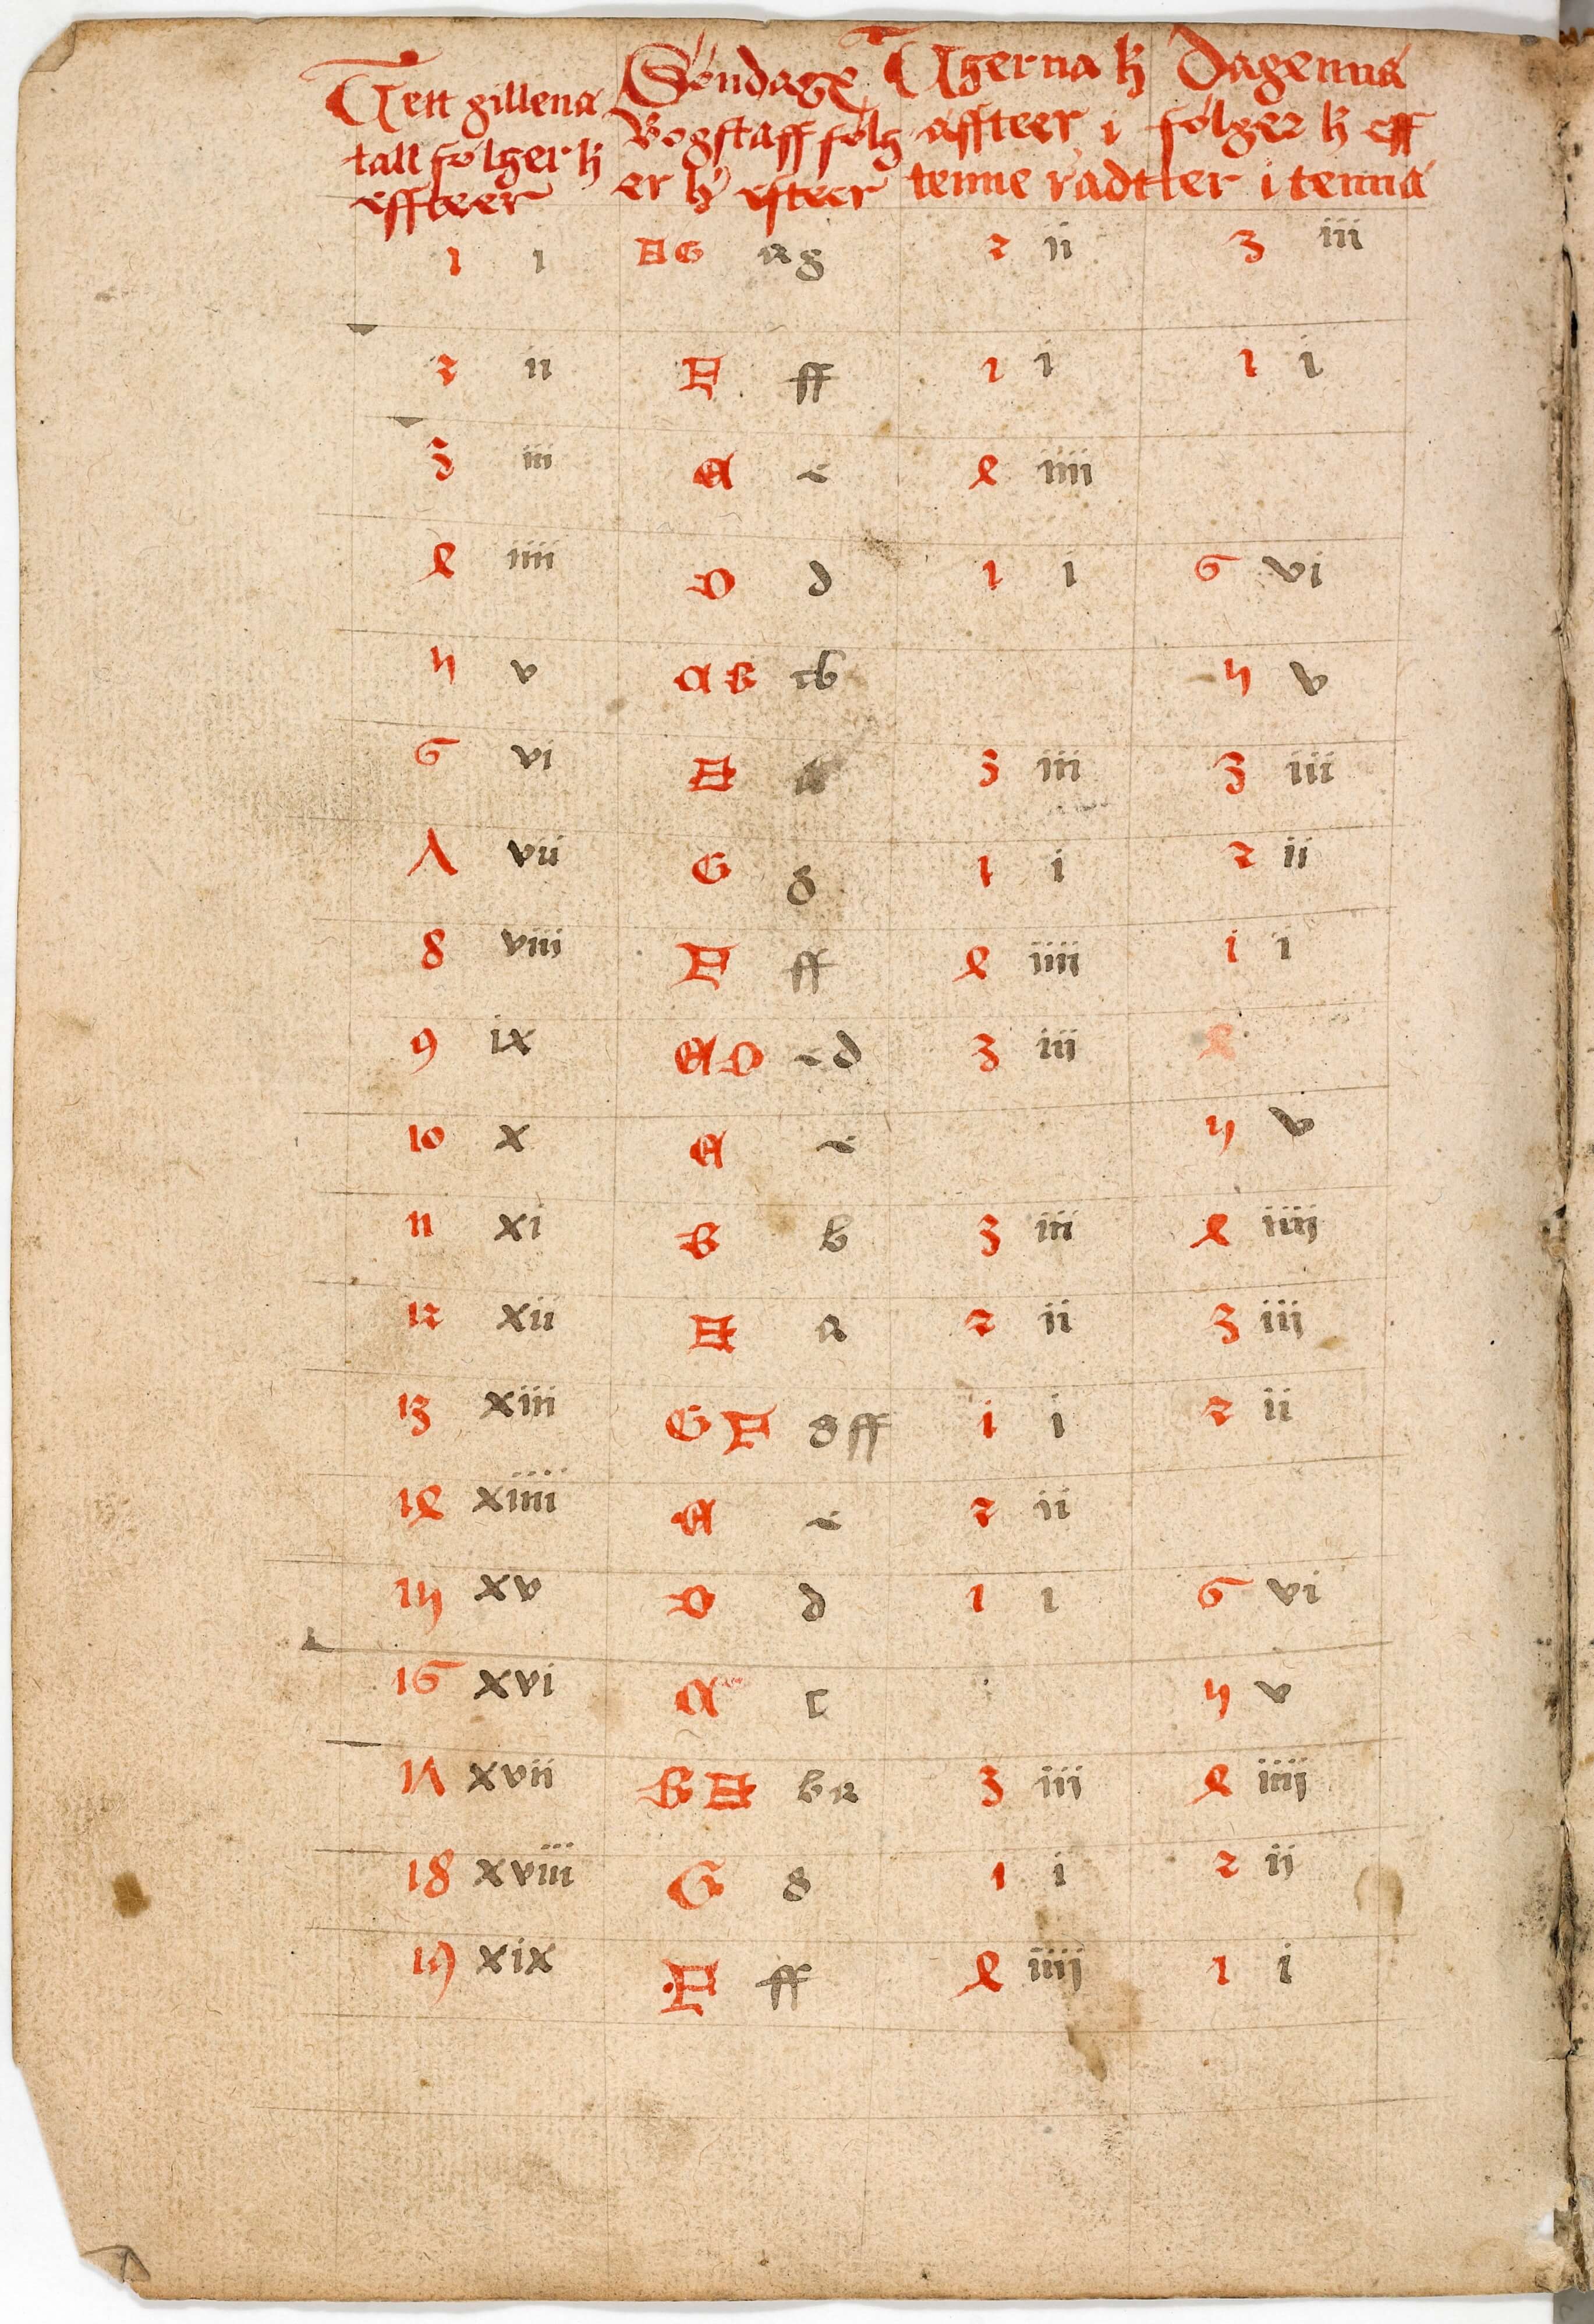 A manuscript page with an Easter Table